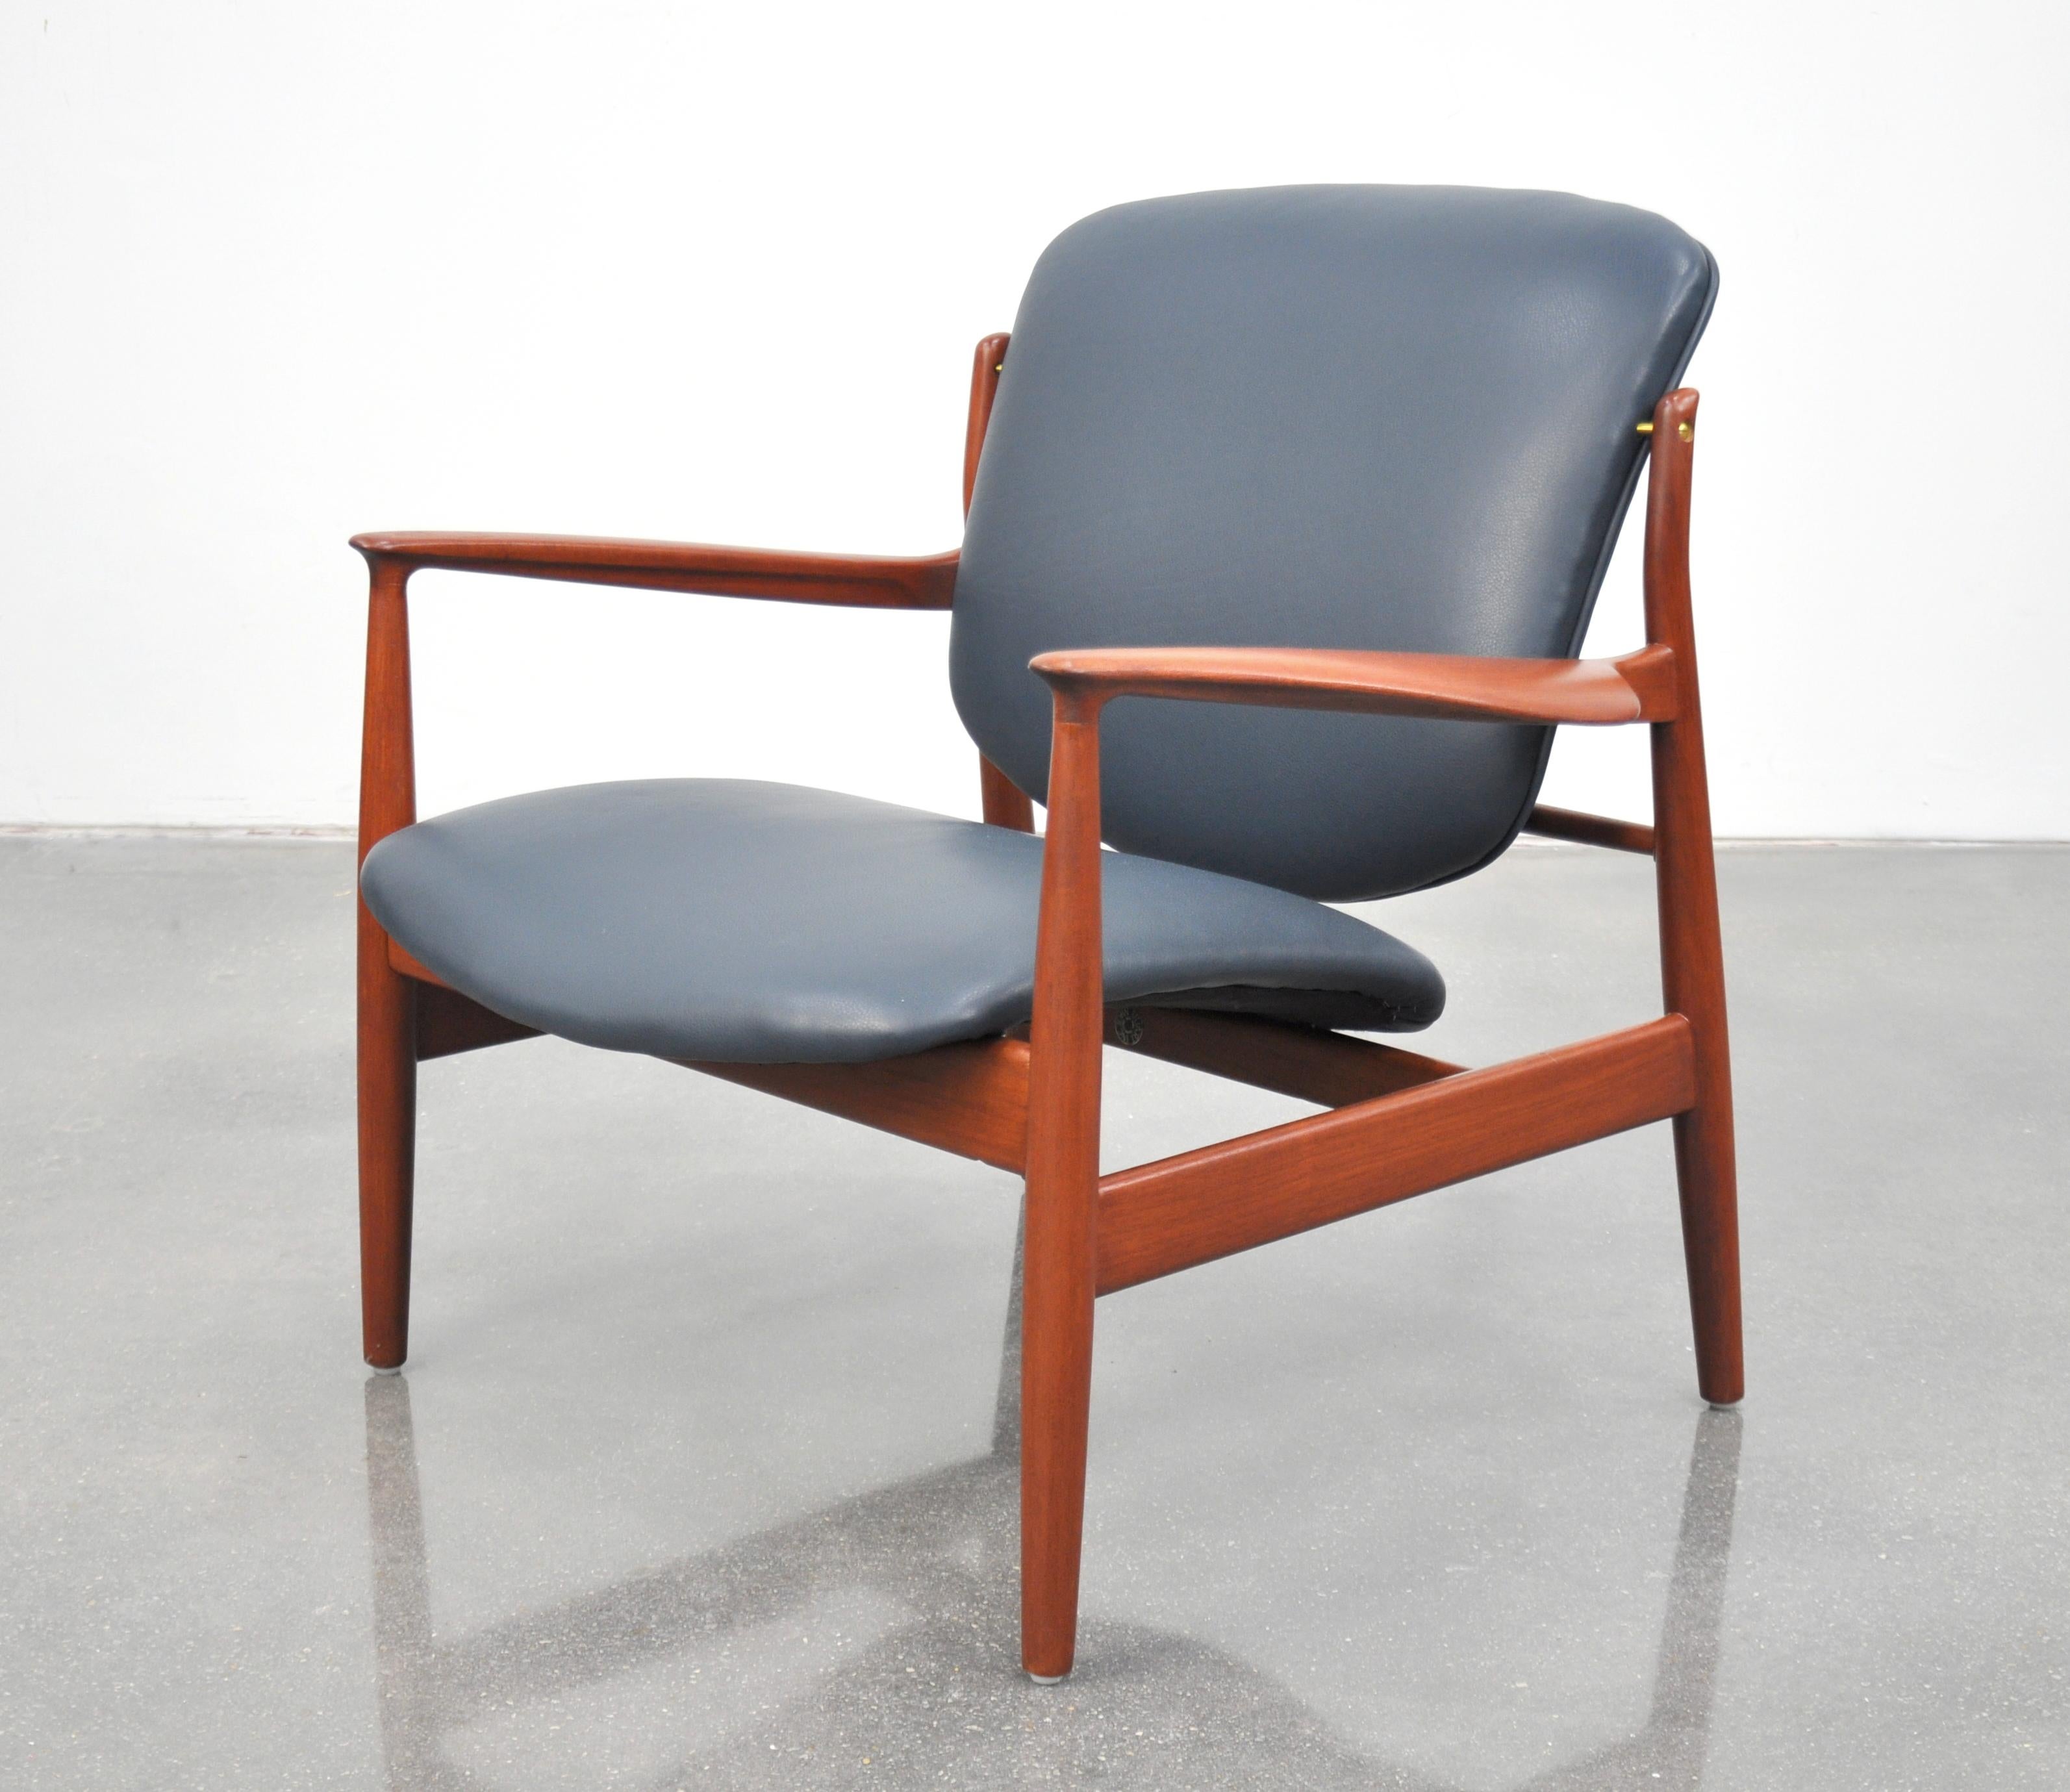 An iconic Mid-Century Danish Modern FD136 easy chair designed by Finn Juhl for France and Daverkosen (later named France and Son) in the 1950s. The seat and backrest have been reupholstered in a gorgeous dark blue pebbled leather. The splendidly